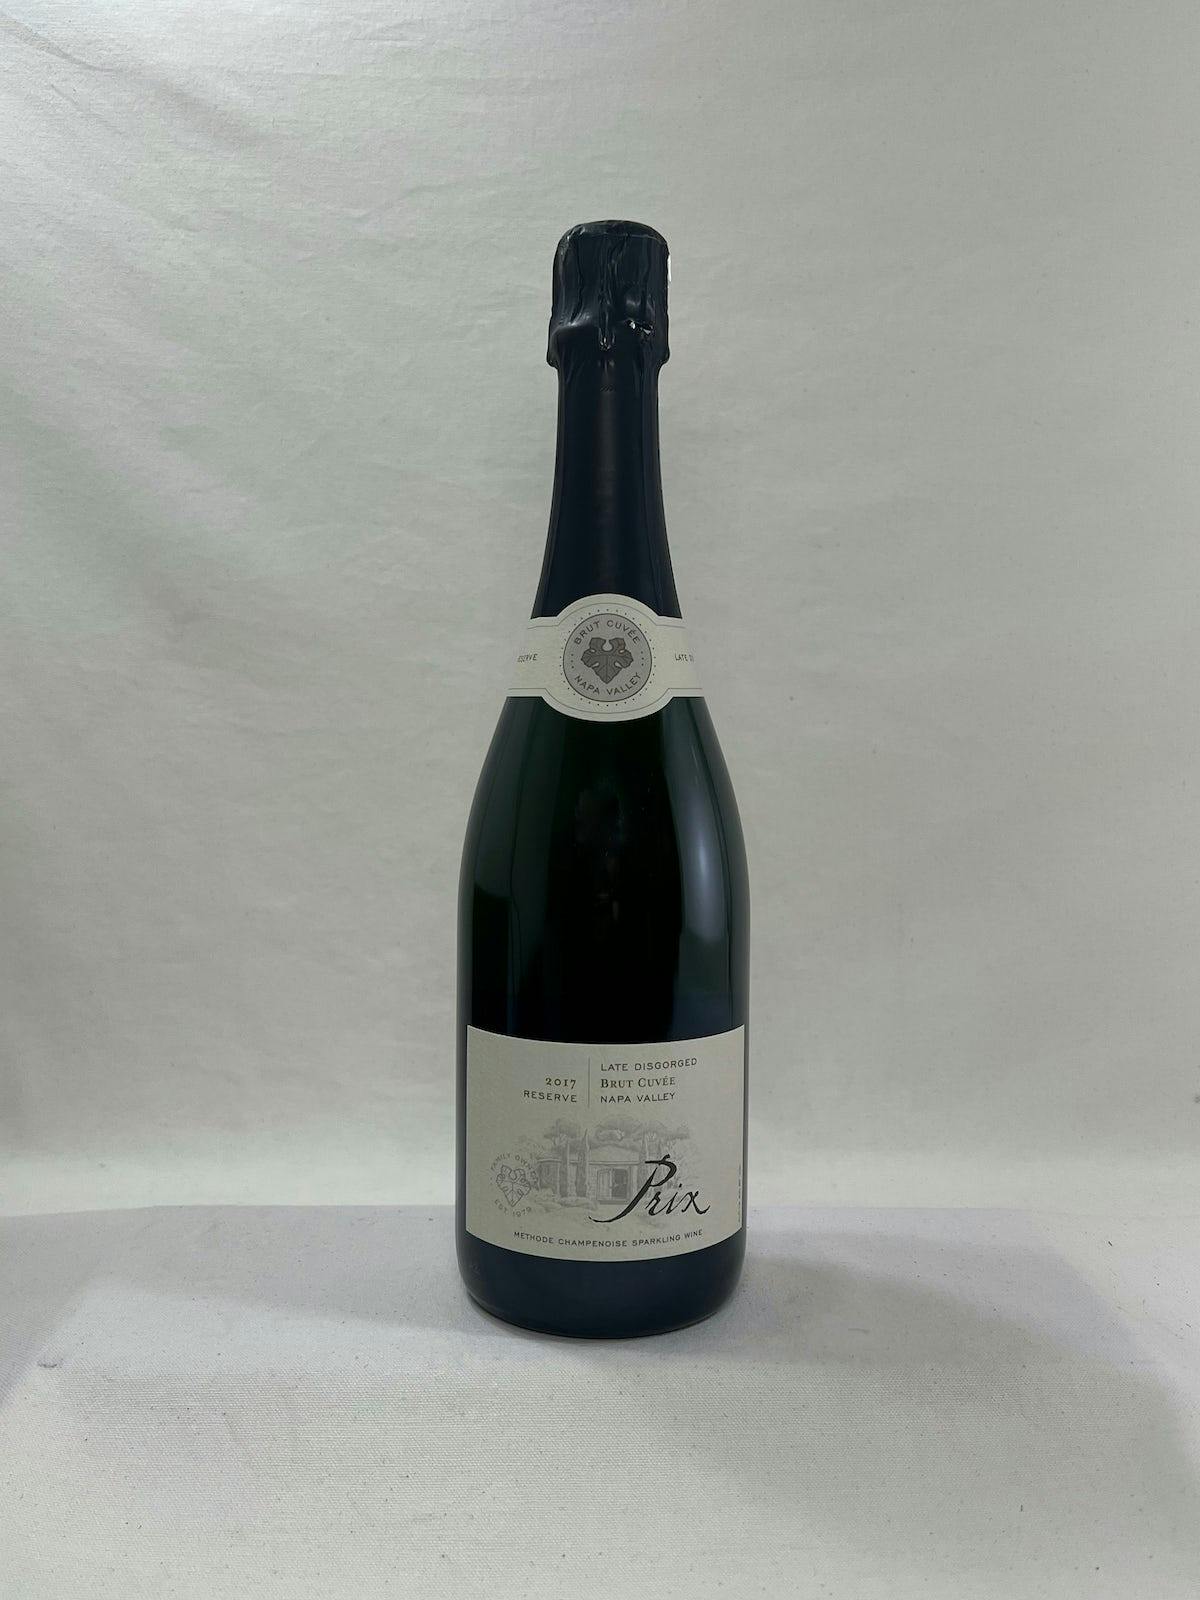 Prix, Napa Valley Brut Late Disgorged  'Cuvée' 2017 750ml